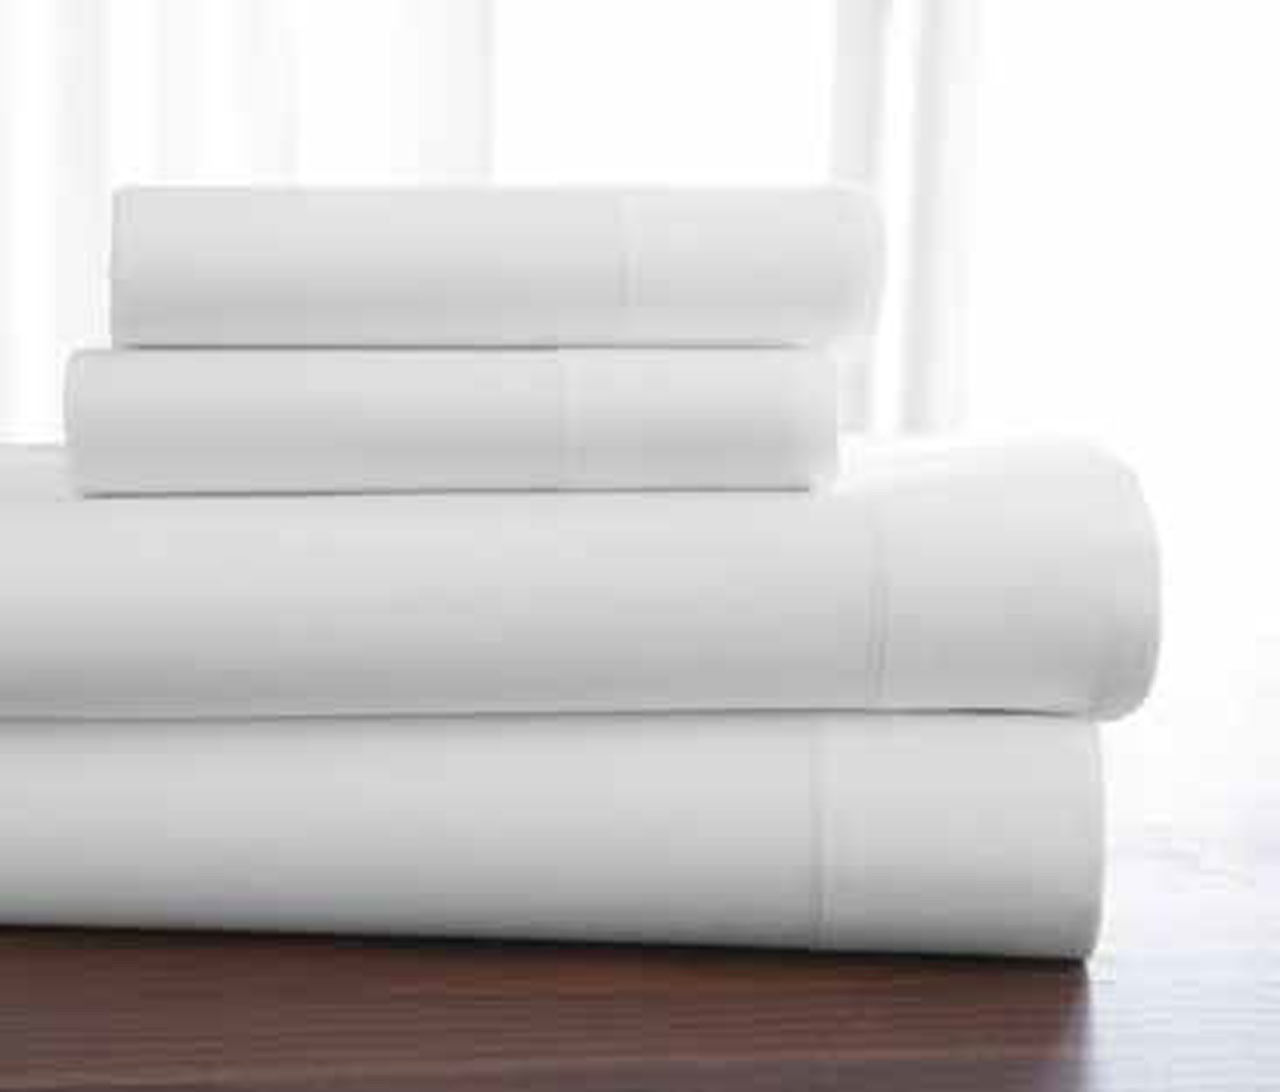 Where can I find Welspun T-400 Premium Hygrocotton Sheets in stock?